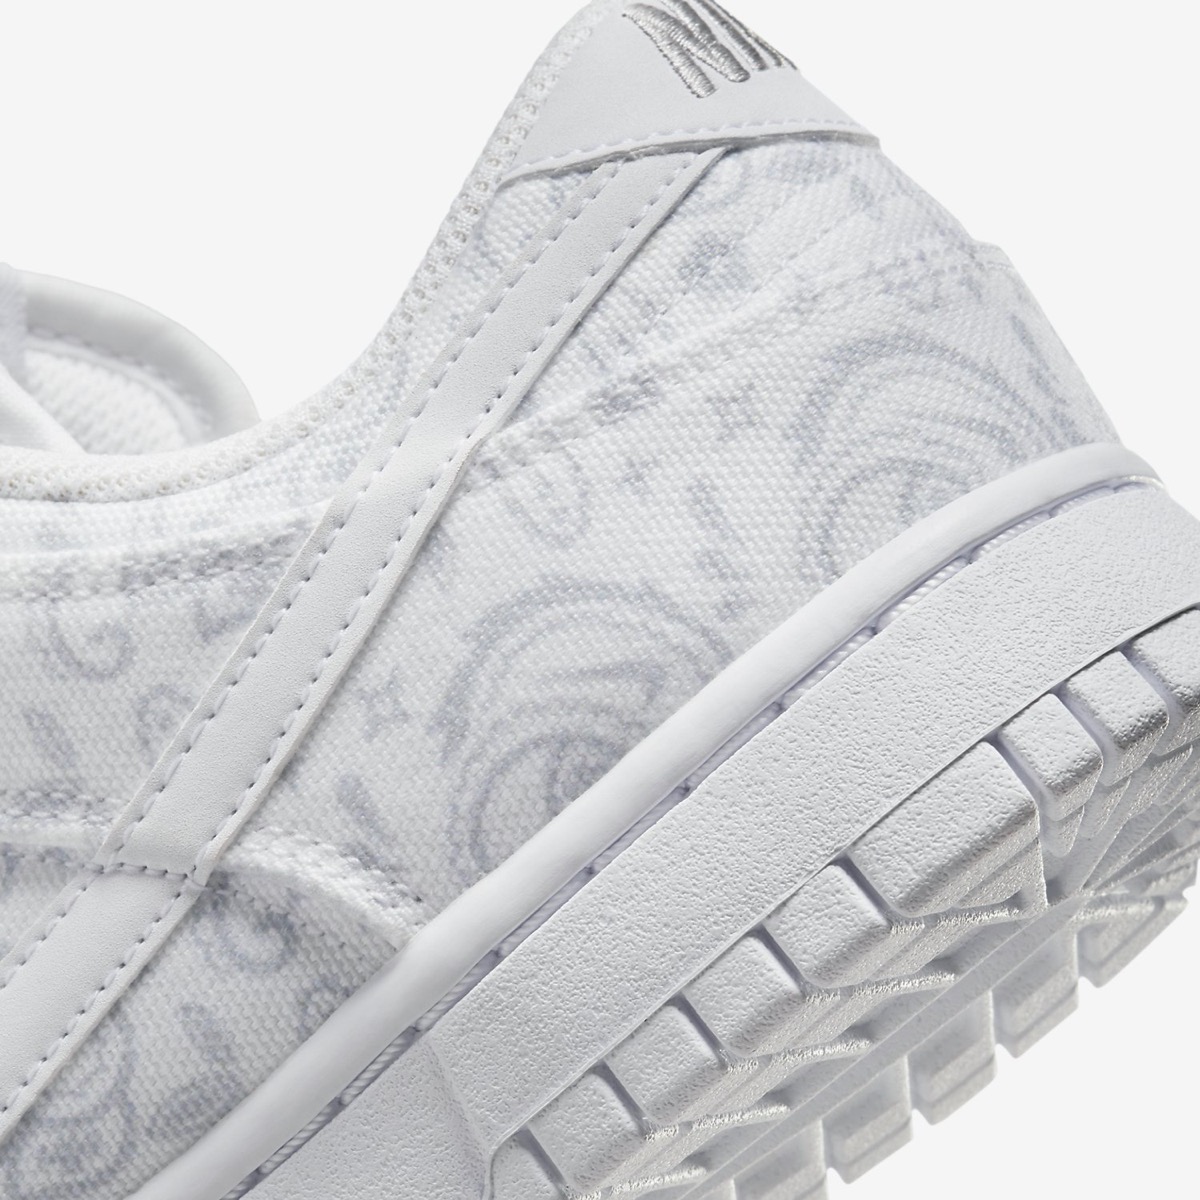 Nike Wmns Dunk Low ESS “White Paisley”が国内6月15日に発売予定 | UP 